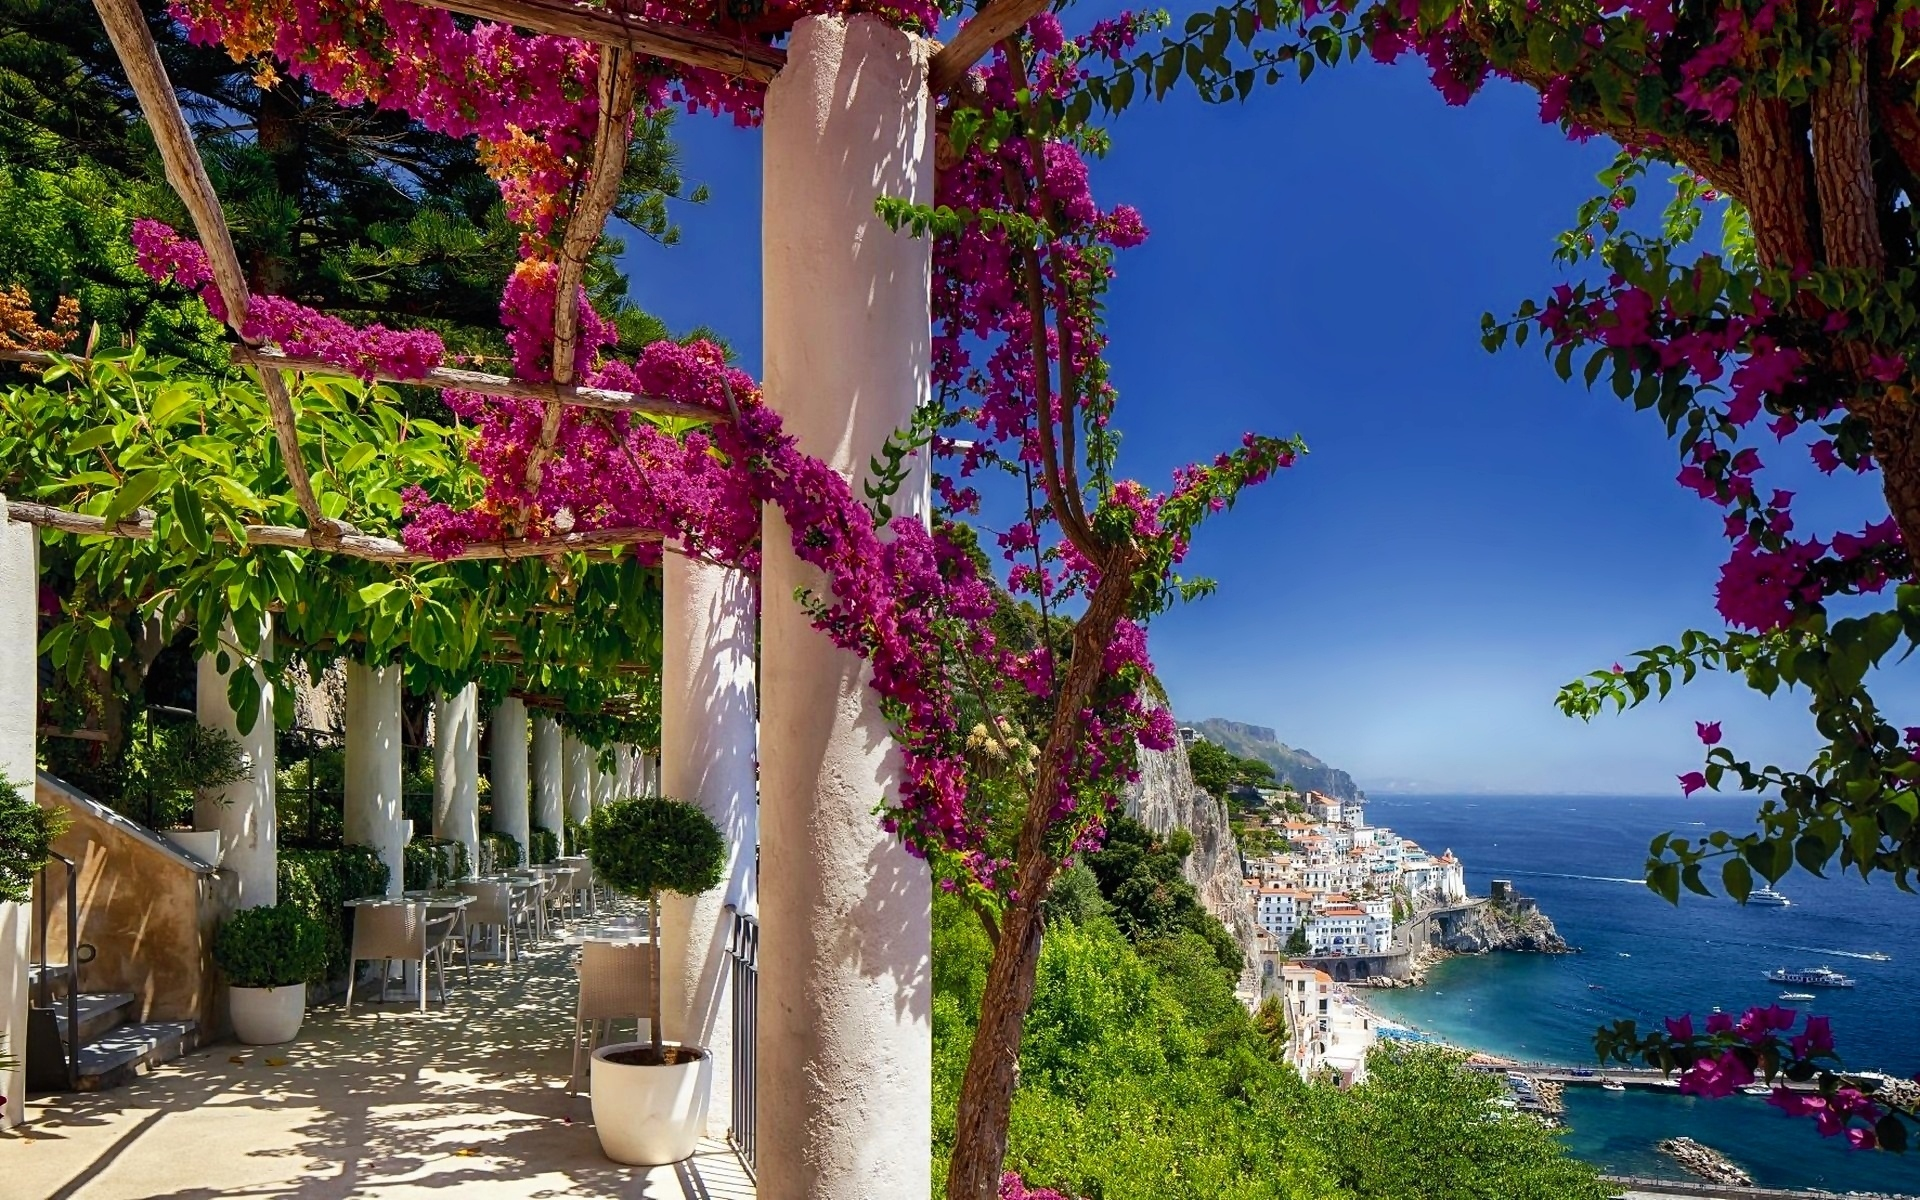 android italy, man made, amalfi, flower, house, tree, towns